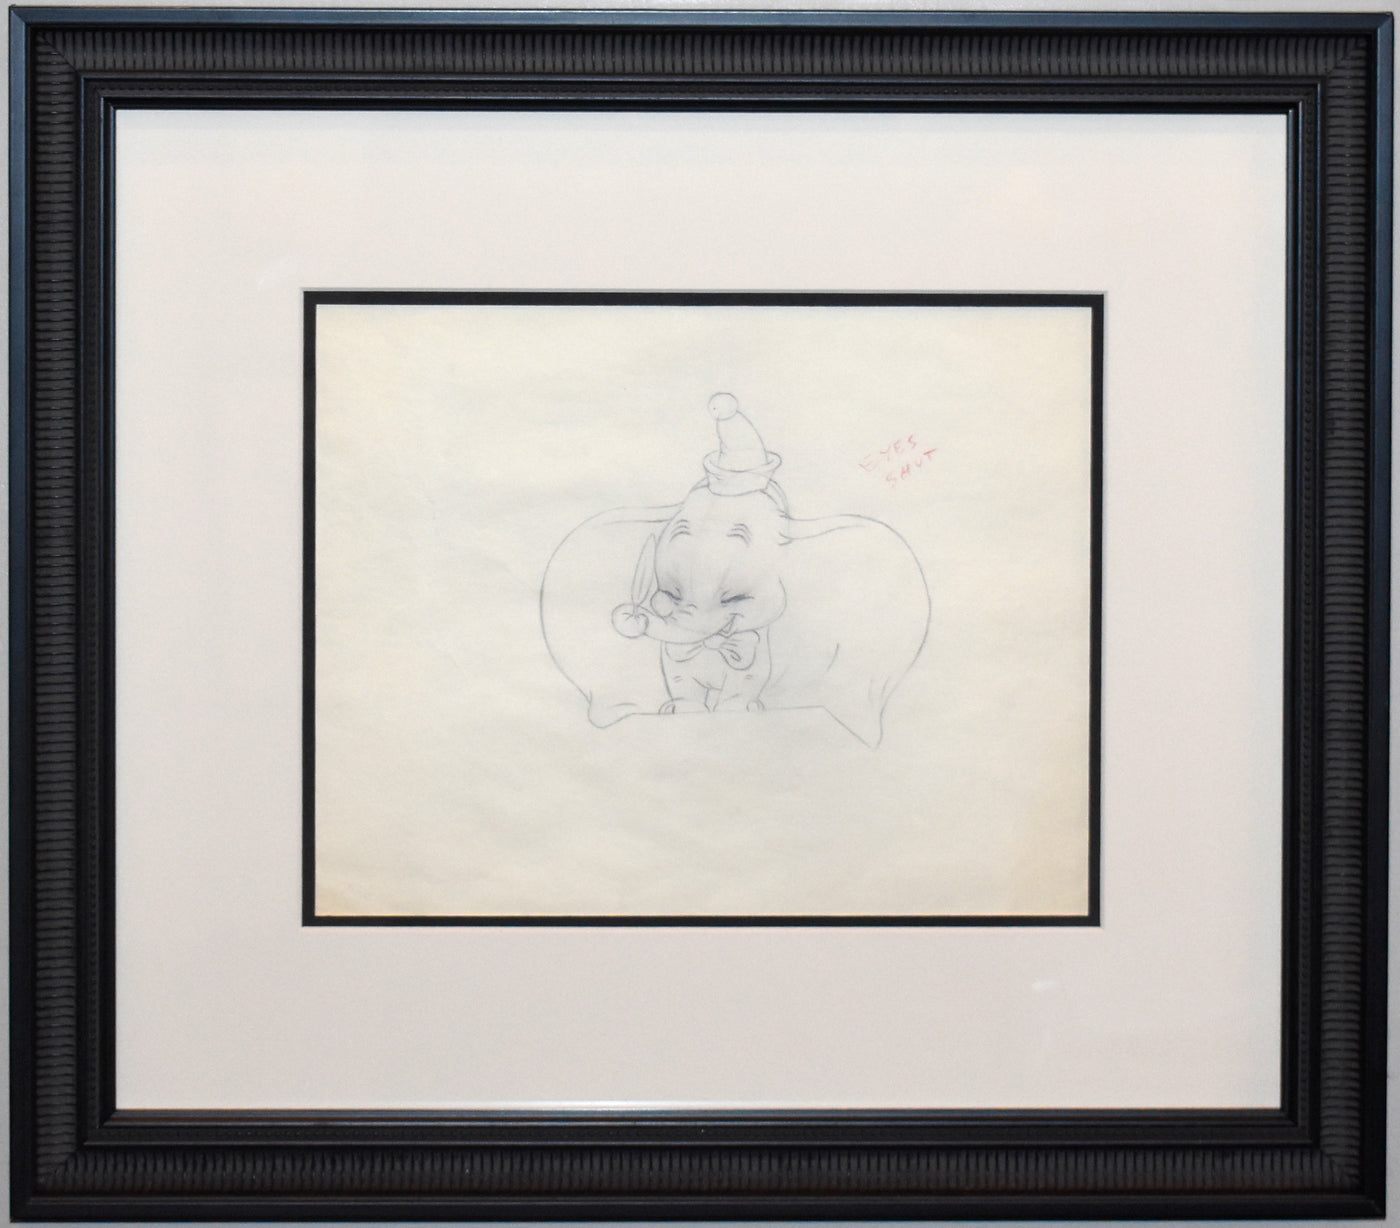 Original Production Drawing from Dumbo featuring Dumbo